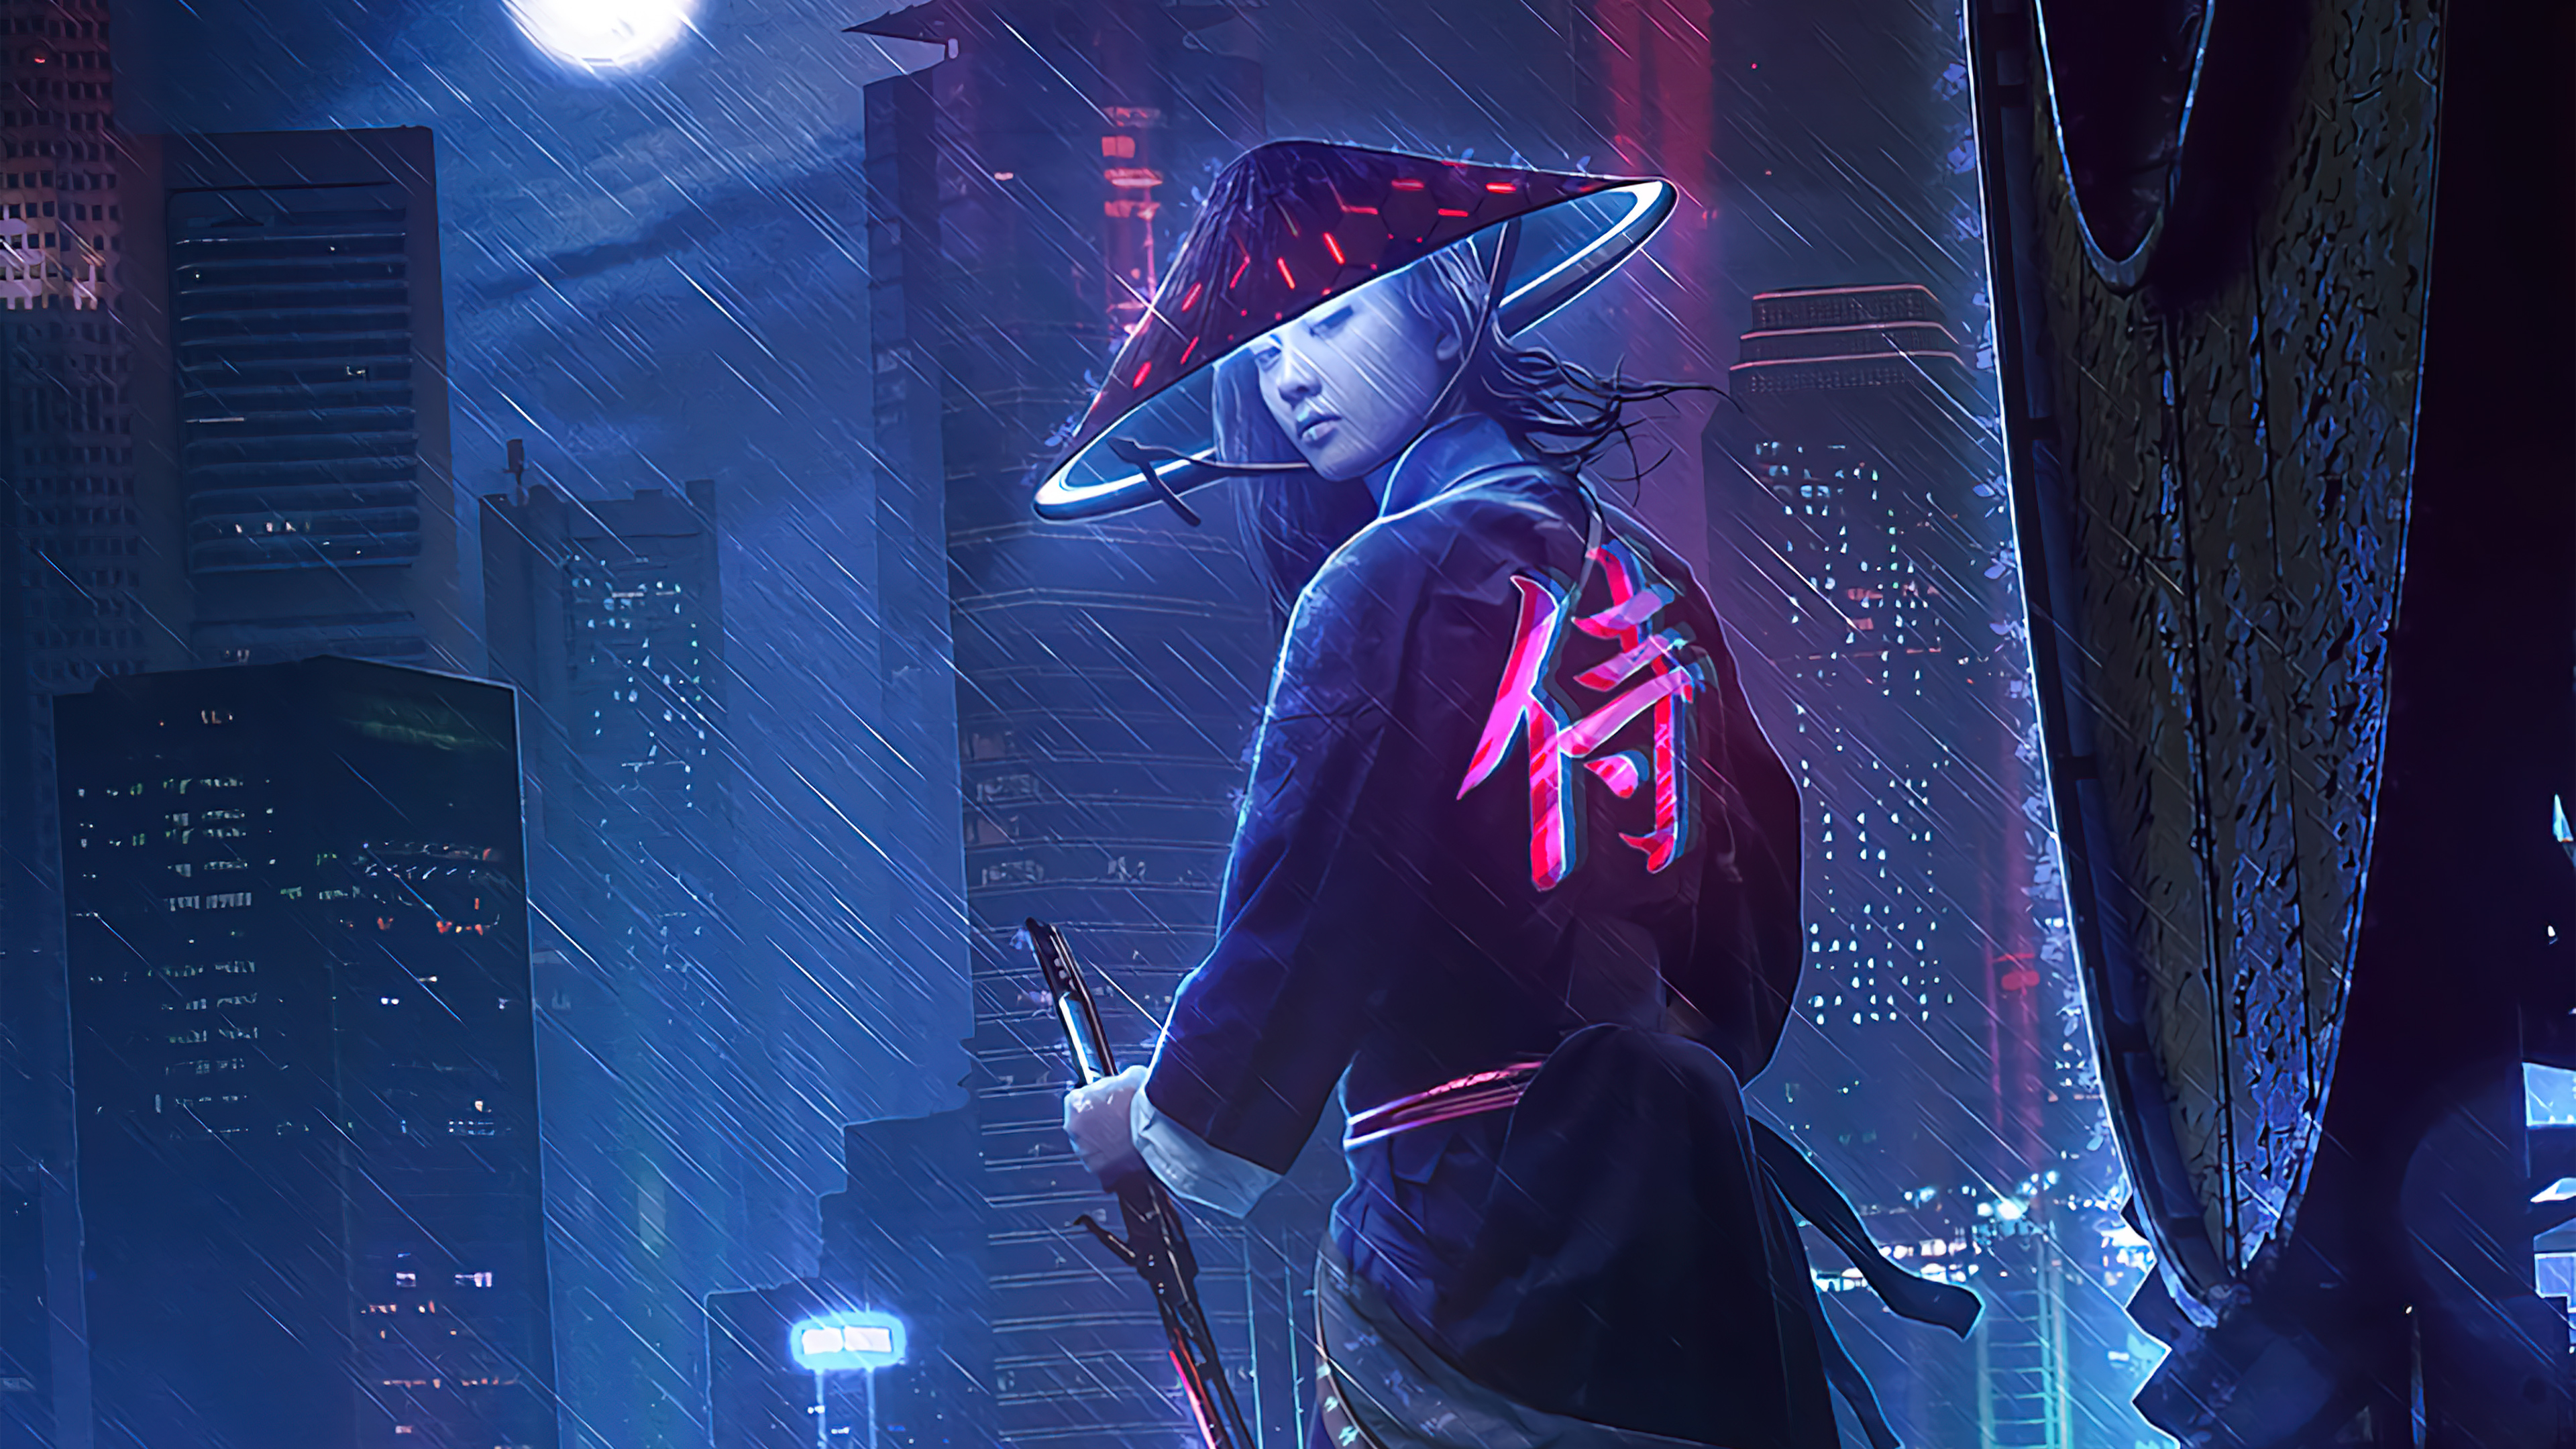 3840x2160 1680x1050 Neon Samurai Girl 4k 1680x1050 Resolution HD 4k Wallpapers, Images, Backgrounds, Photos and Pictures